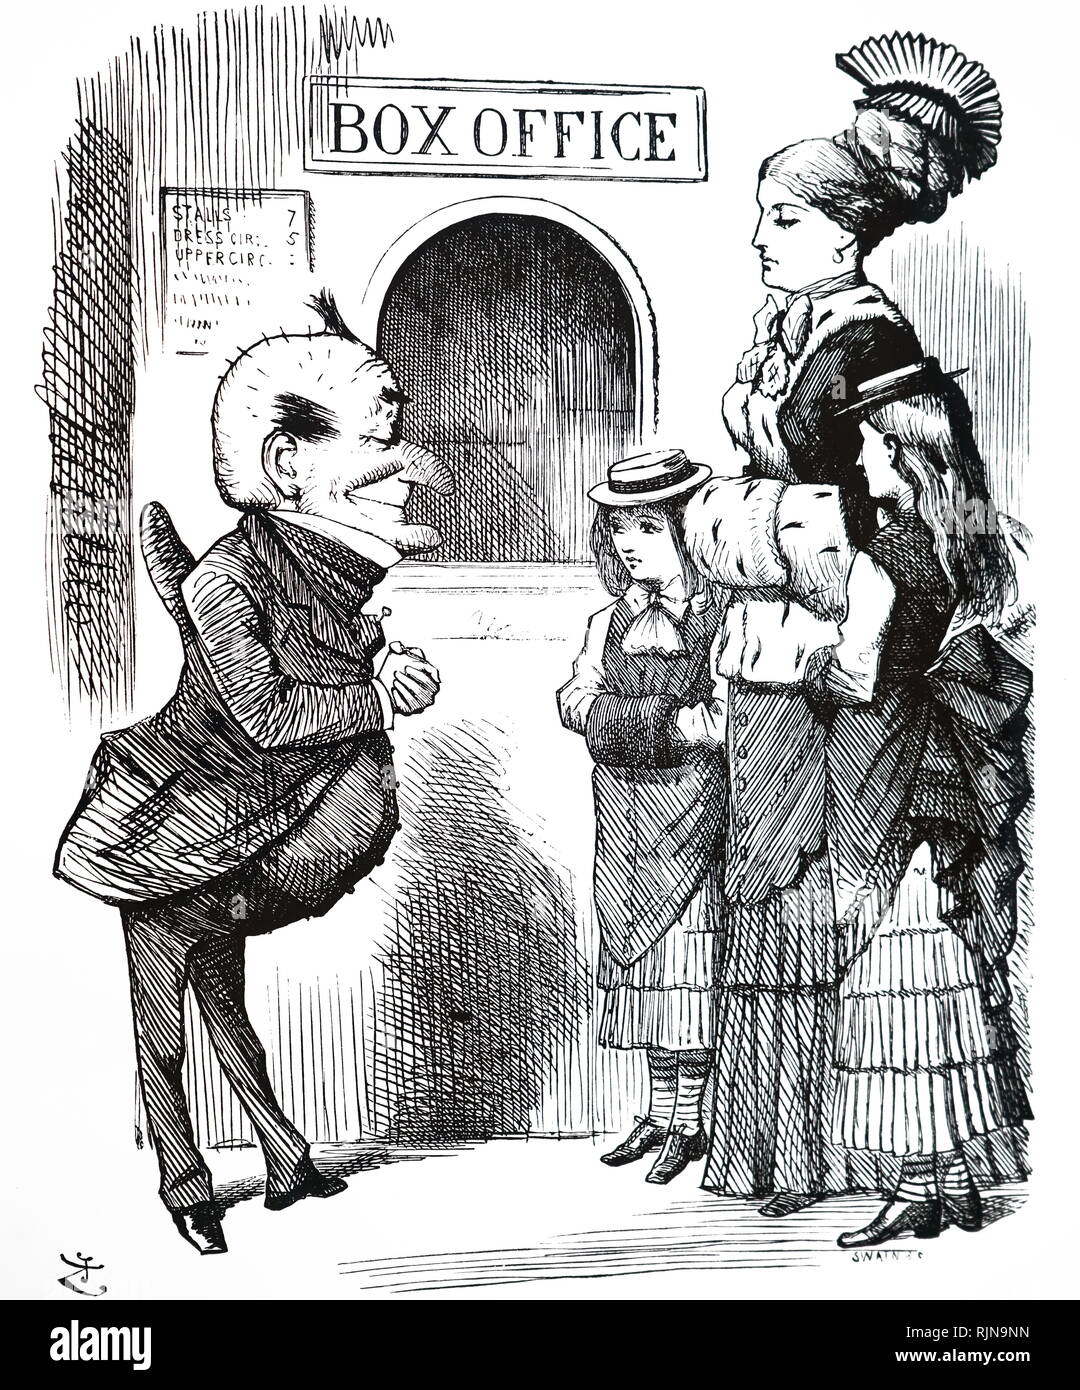 A political cartoon commenting on the censorship of plays enforced by Lord Chamberlain; illustrated by John Tenniel (1820-1914). Dated 19th century Stock Photo